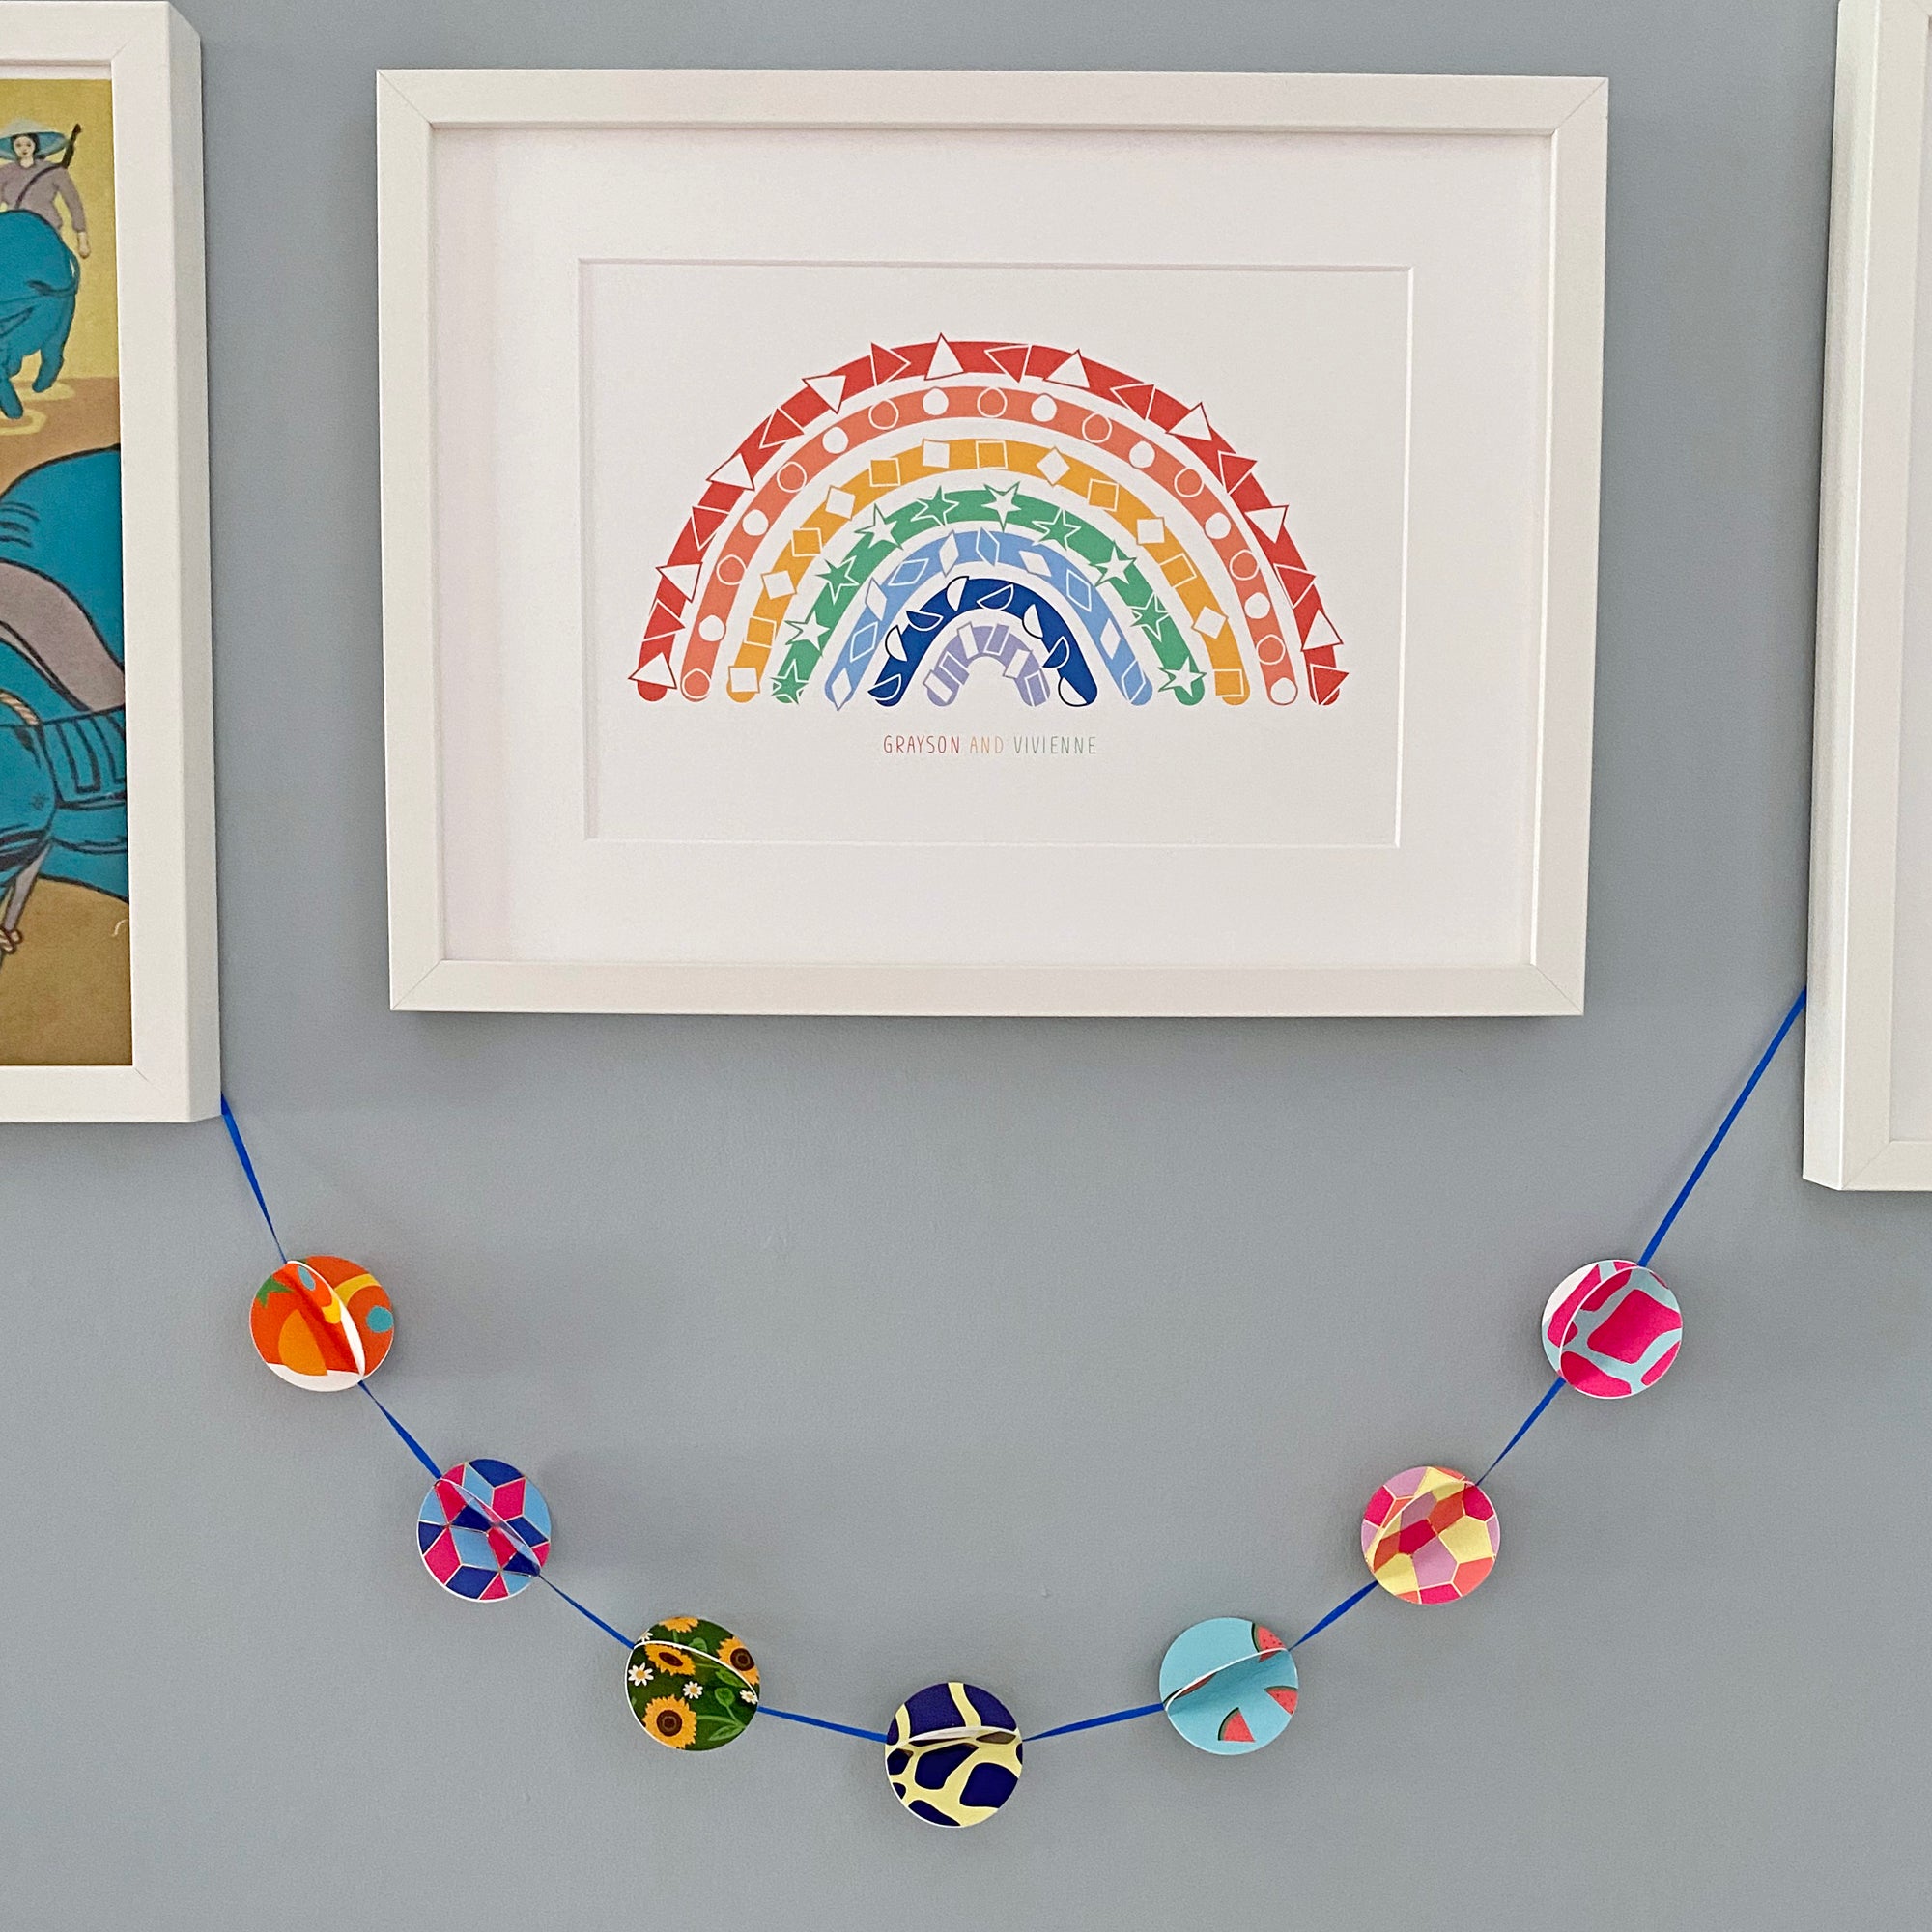 How to make a garland from old greetings cards!